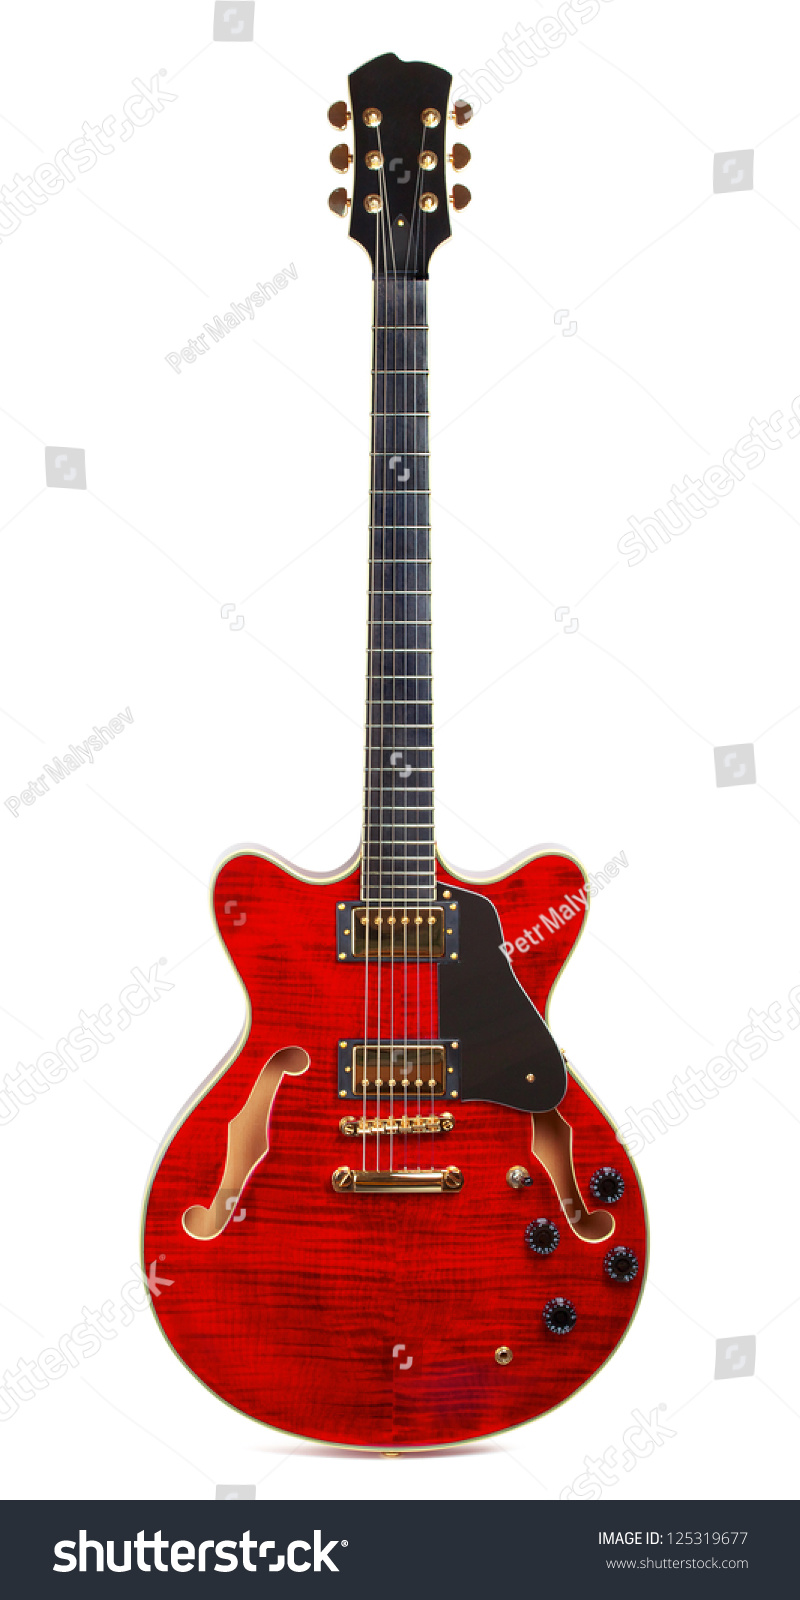 red semi-hollow electric guitar isolated on white background #125319677